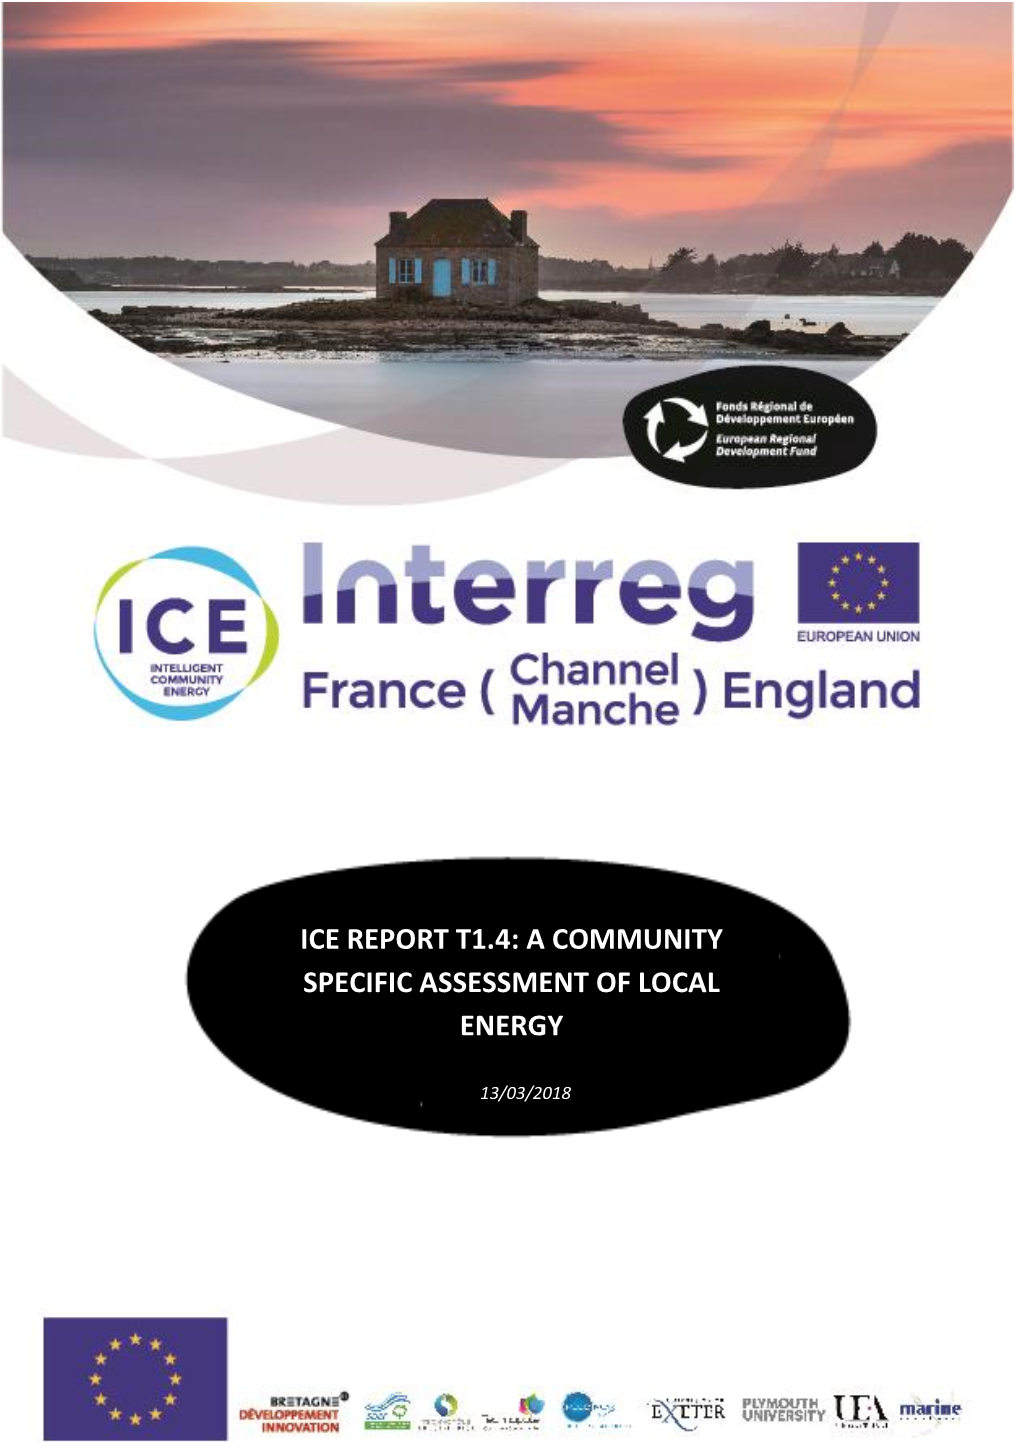 Ice Report T1.4: a Community Specific Assessment of Local Energy